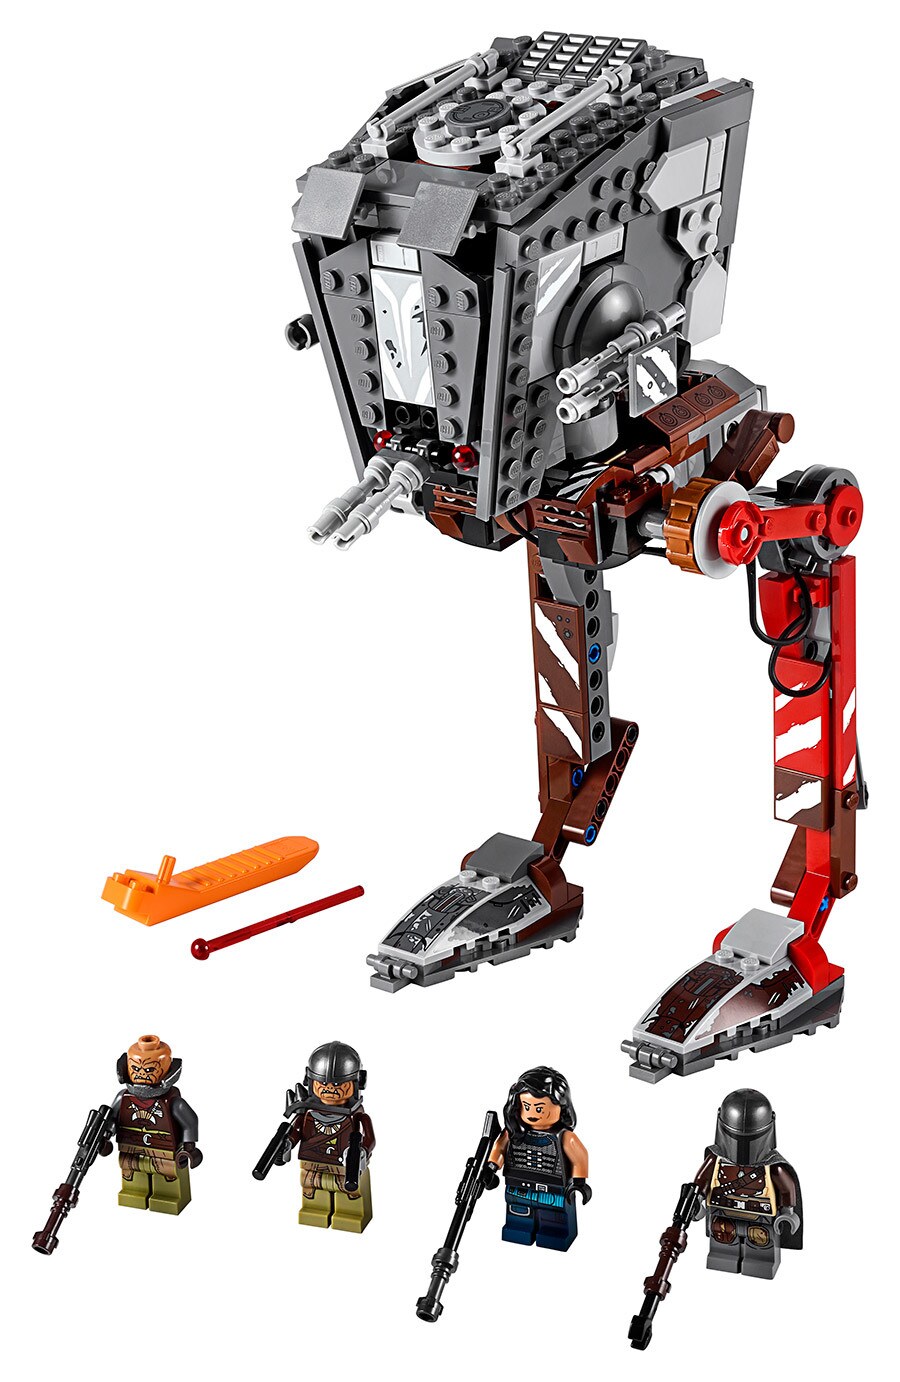 The new LEGO AT-ST Raider from The Mandalorian.